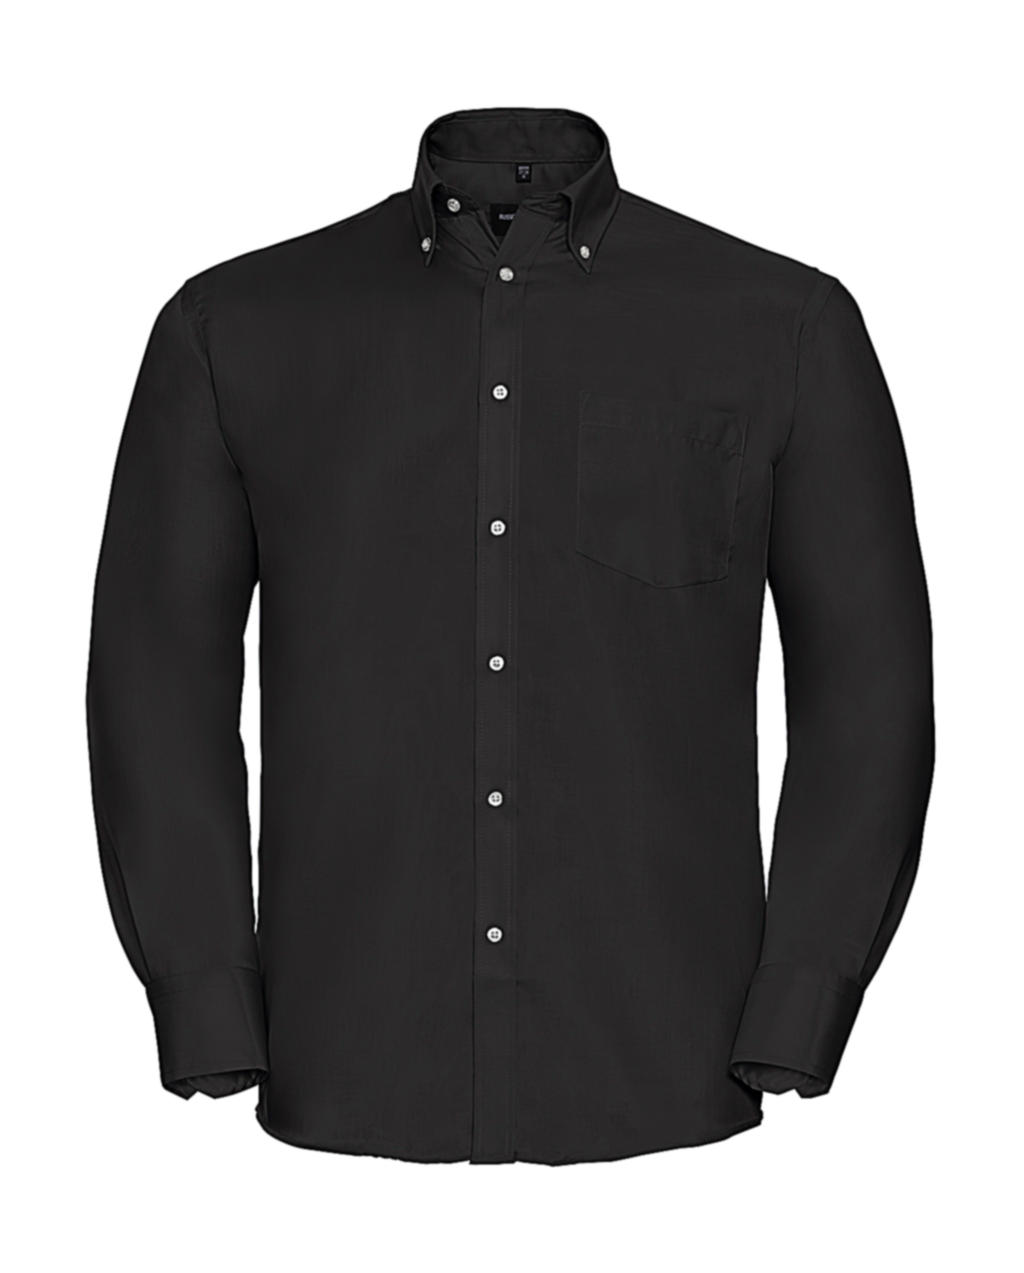  Mens LS Ultimate Non-iron Shirt in Farbe Black